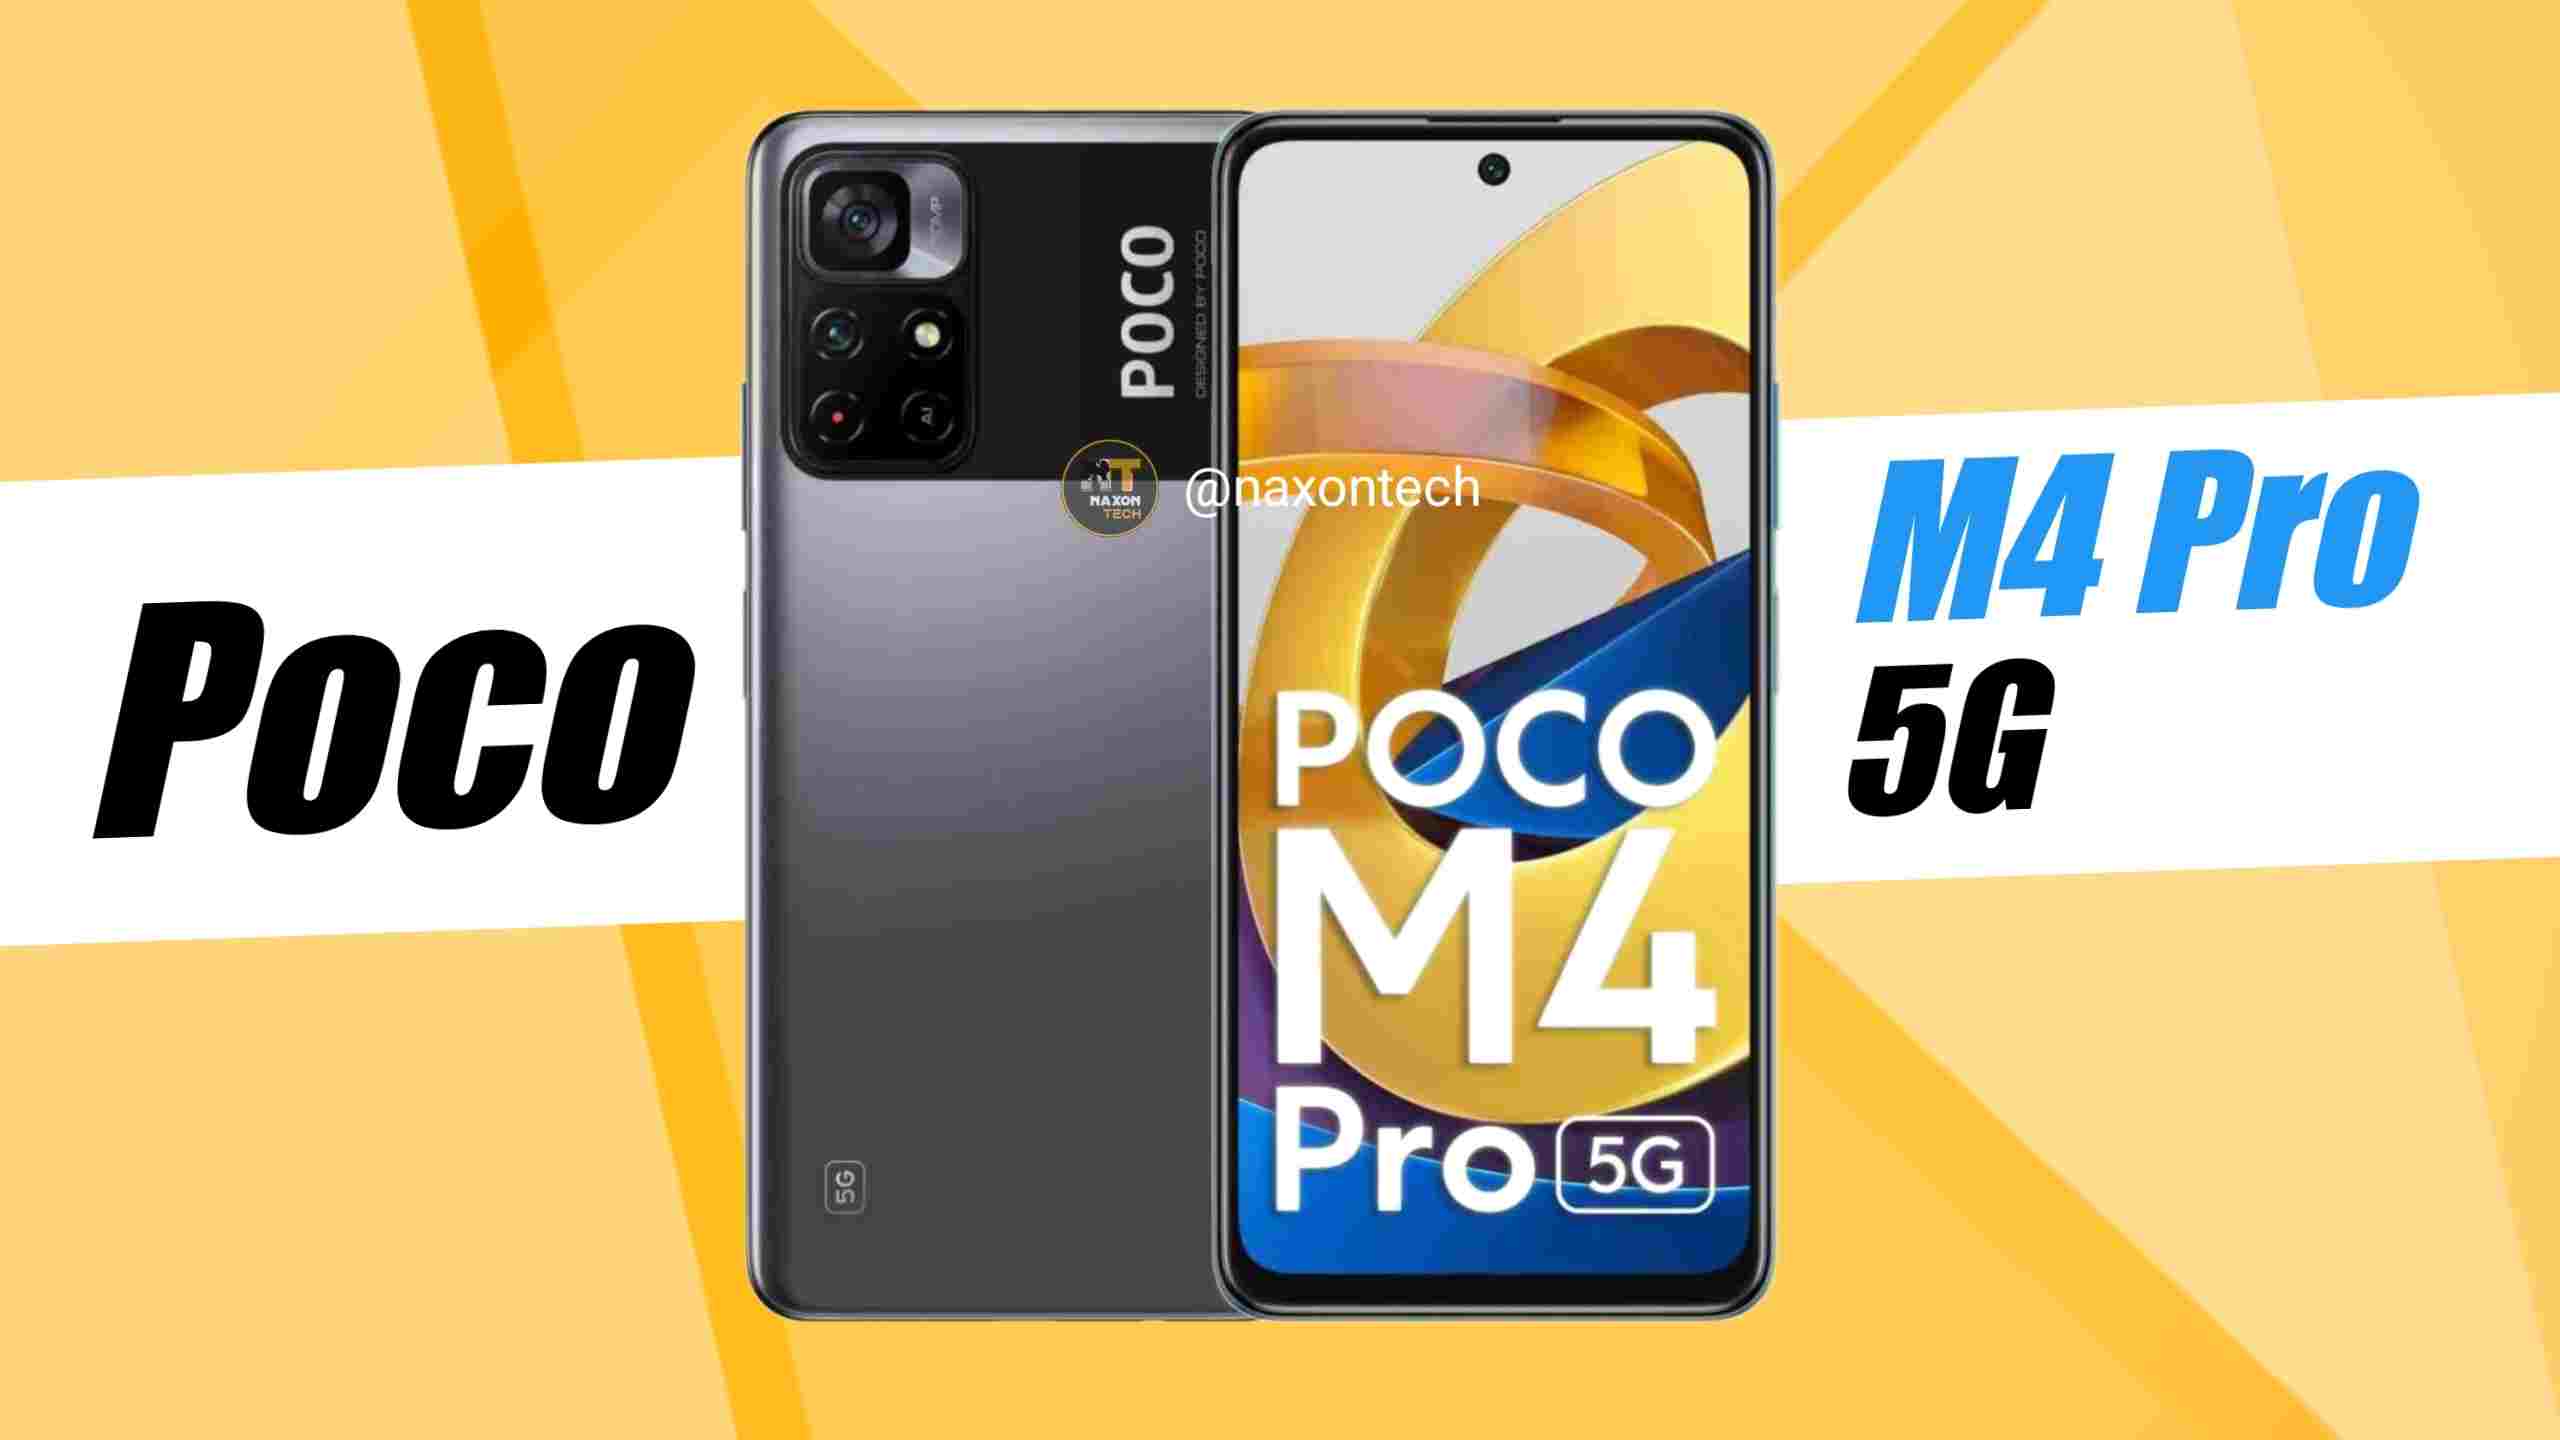 Poco M4 Pro 5G with MediaTek Dimensity 810 launched in India: Price, Specifications